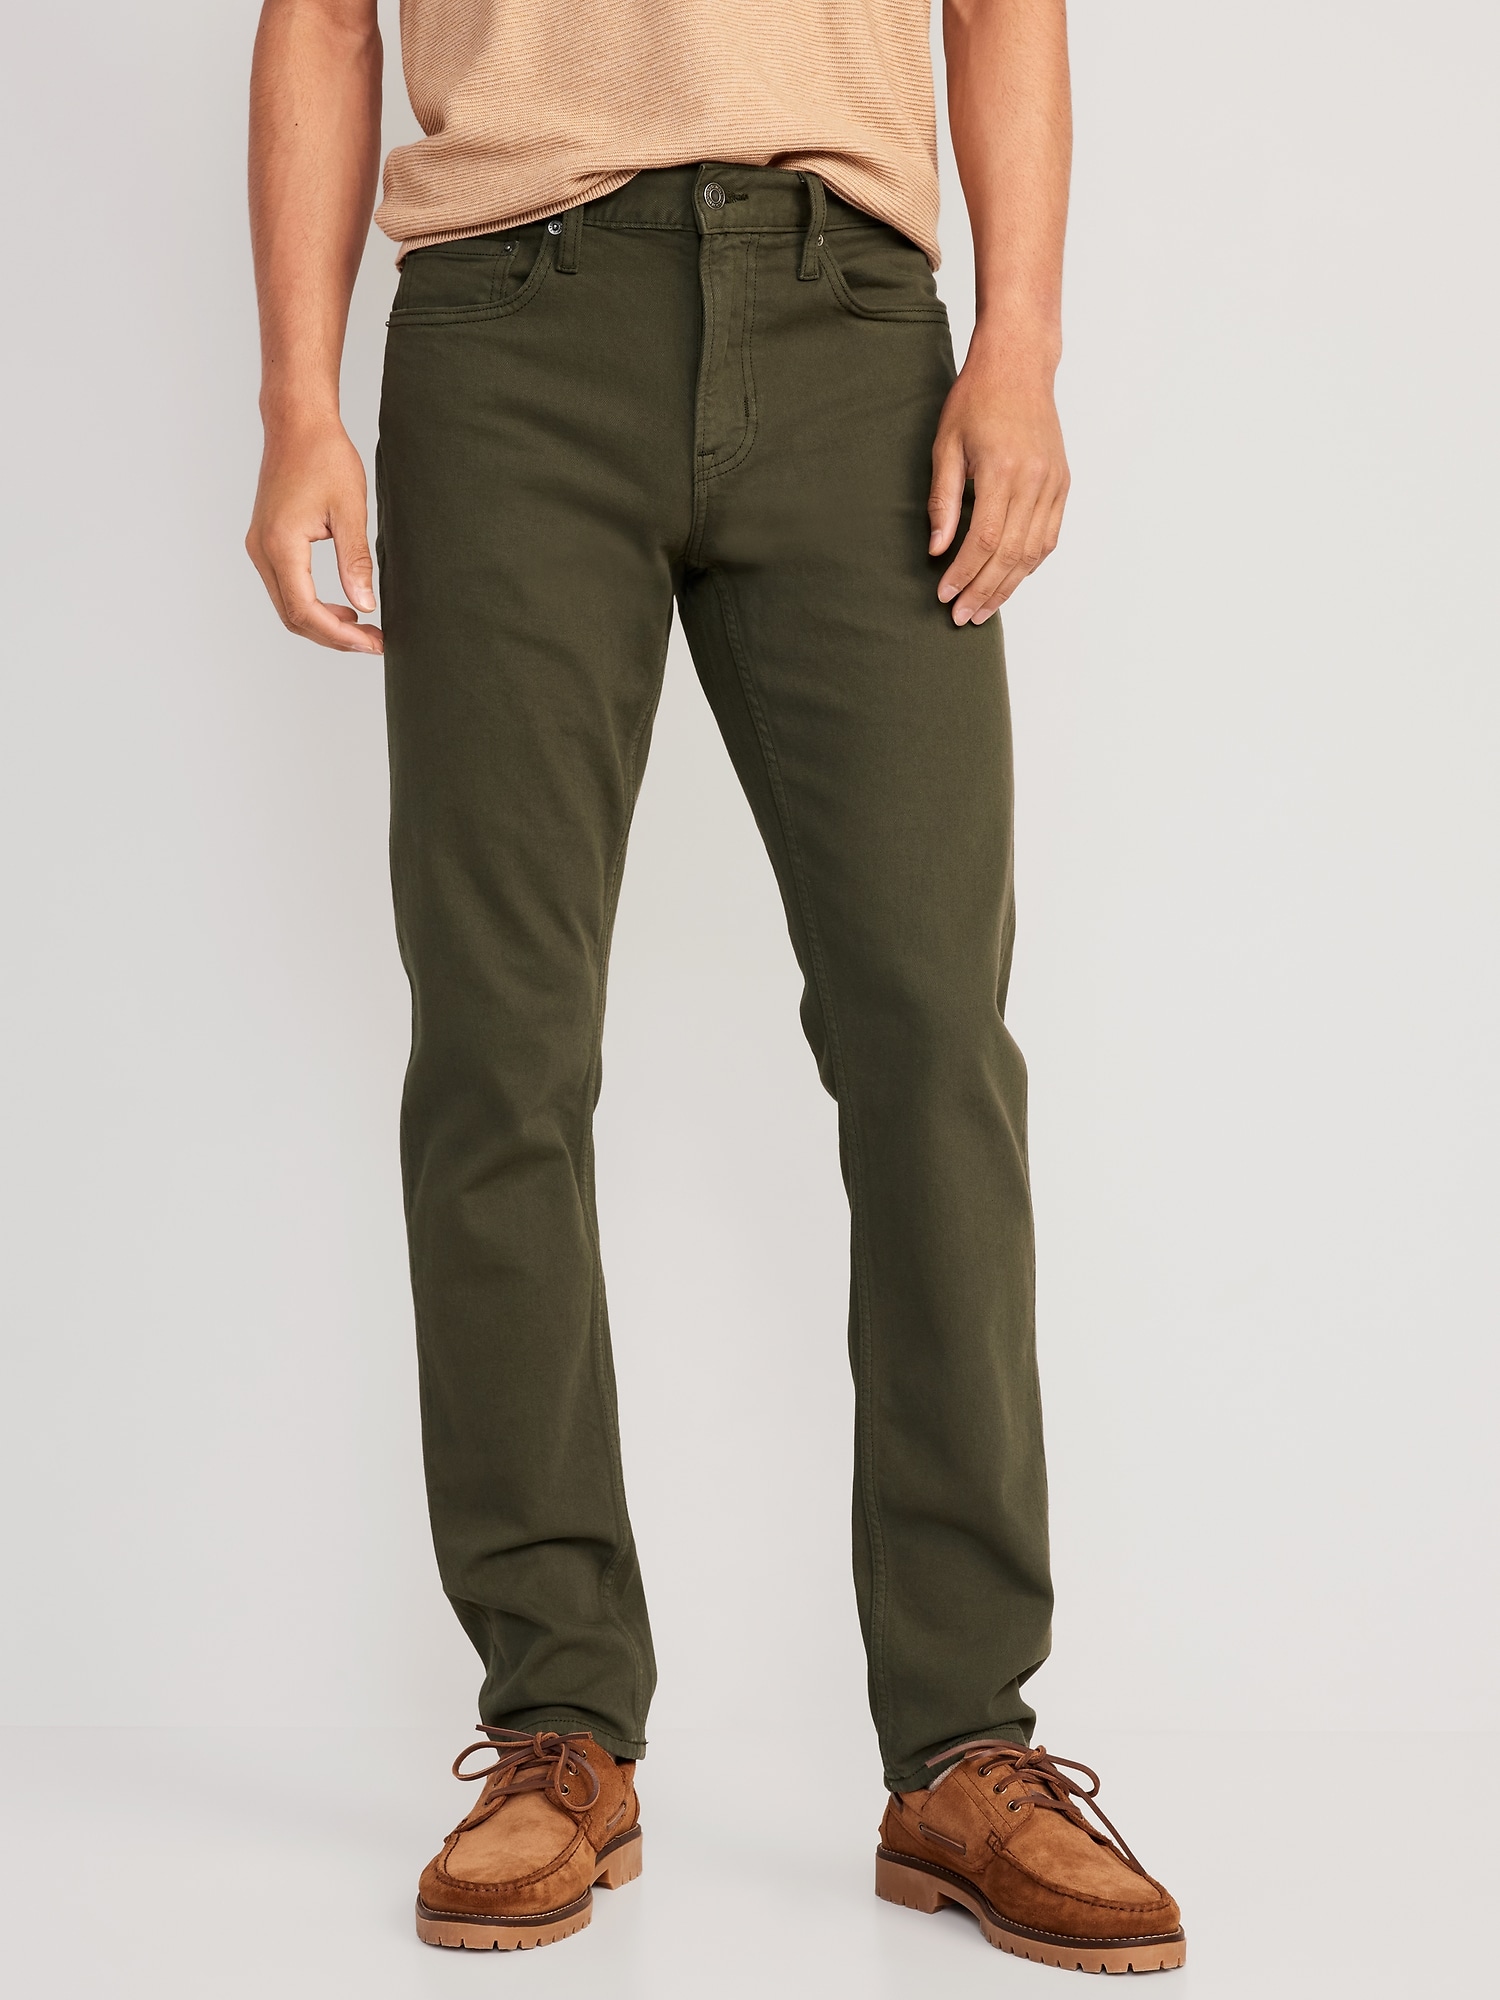 Buy Basic Twill Pants Men's Jeans & Pants from Buyers Picks. Find Buyers  Picks fashion & more at DrJays.com